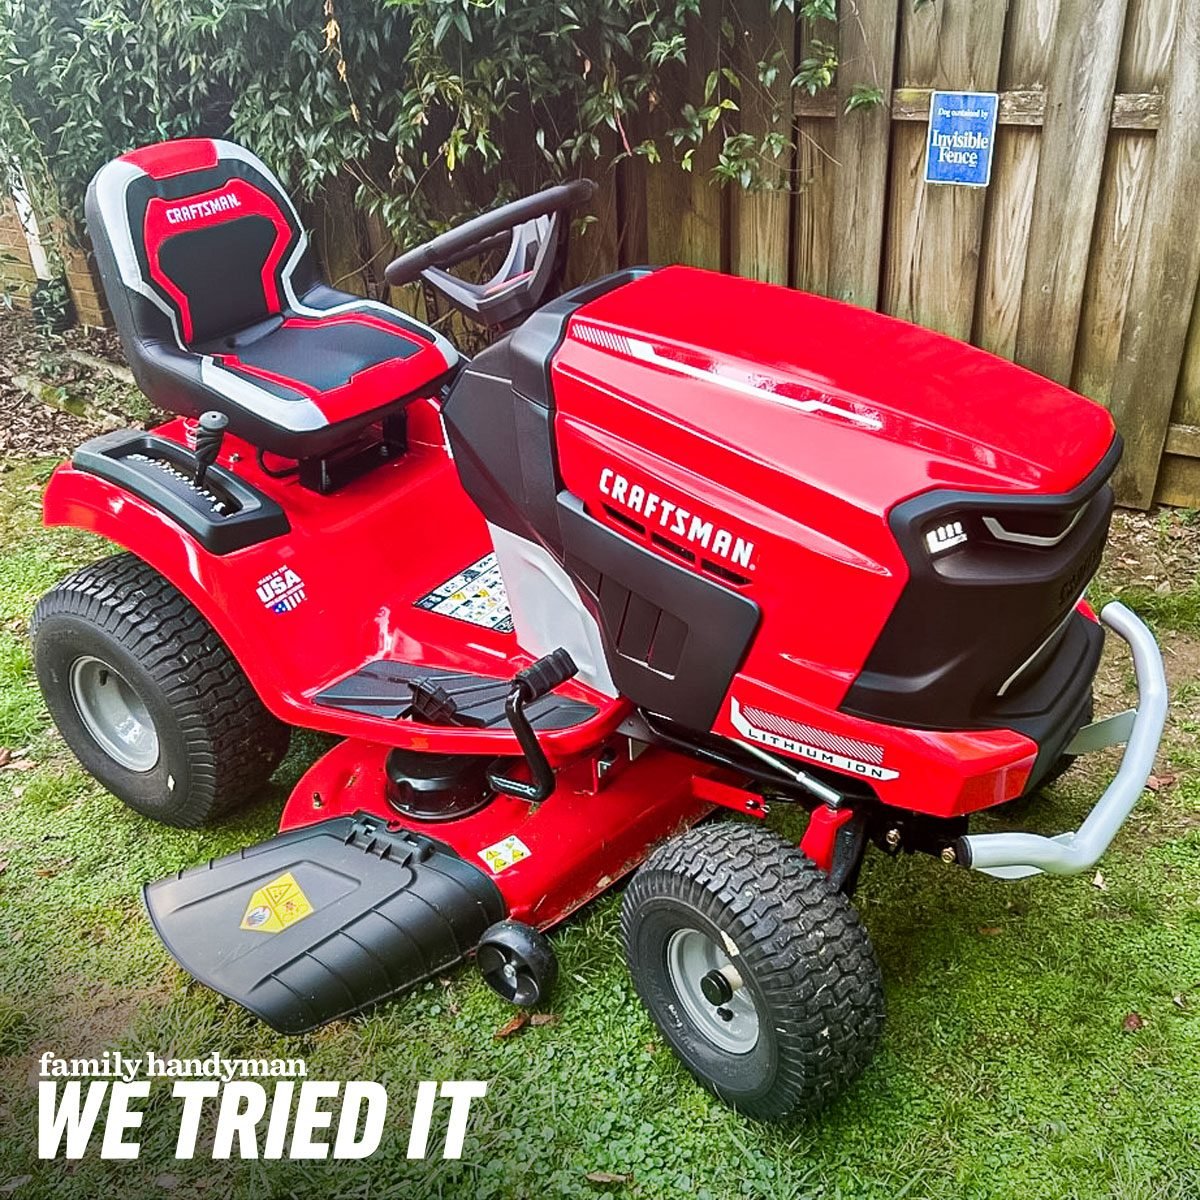 We Tried the Craftsman Electric Lawn Mower, a Riding Mower for Tight Spaces